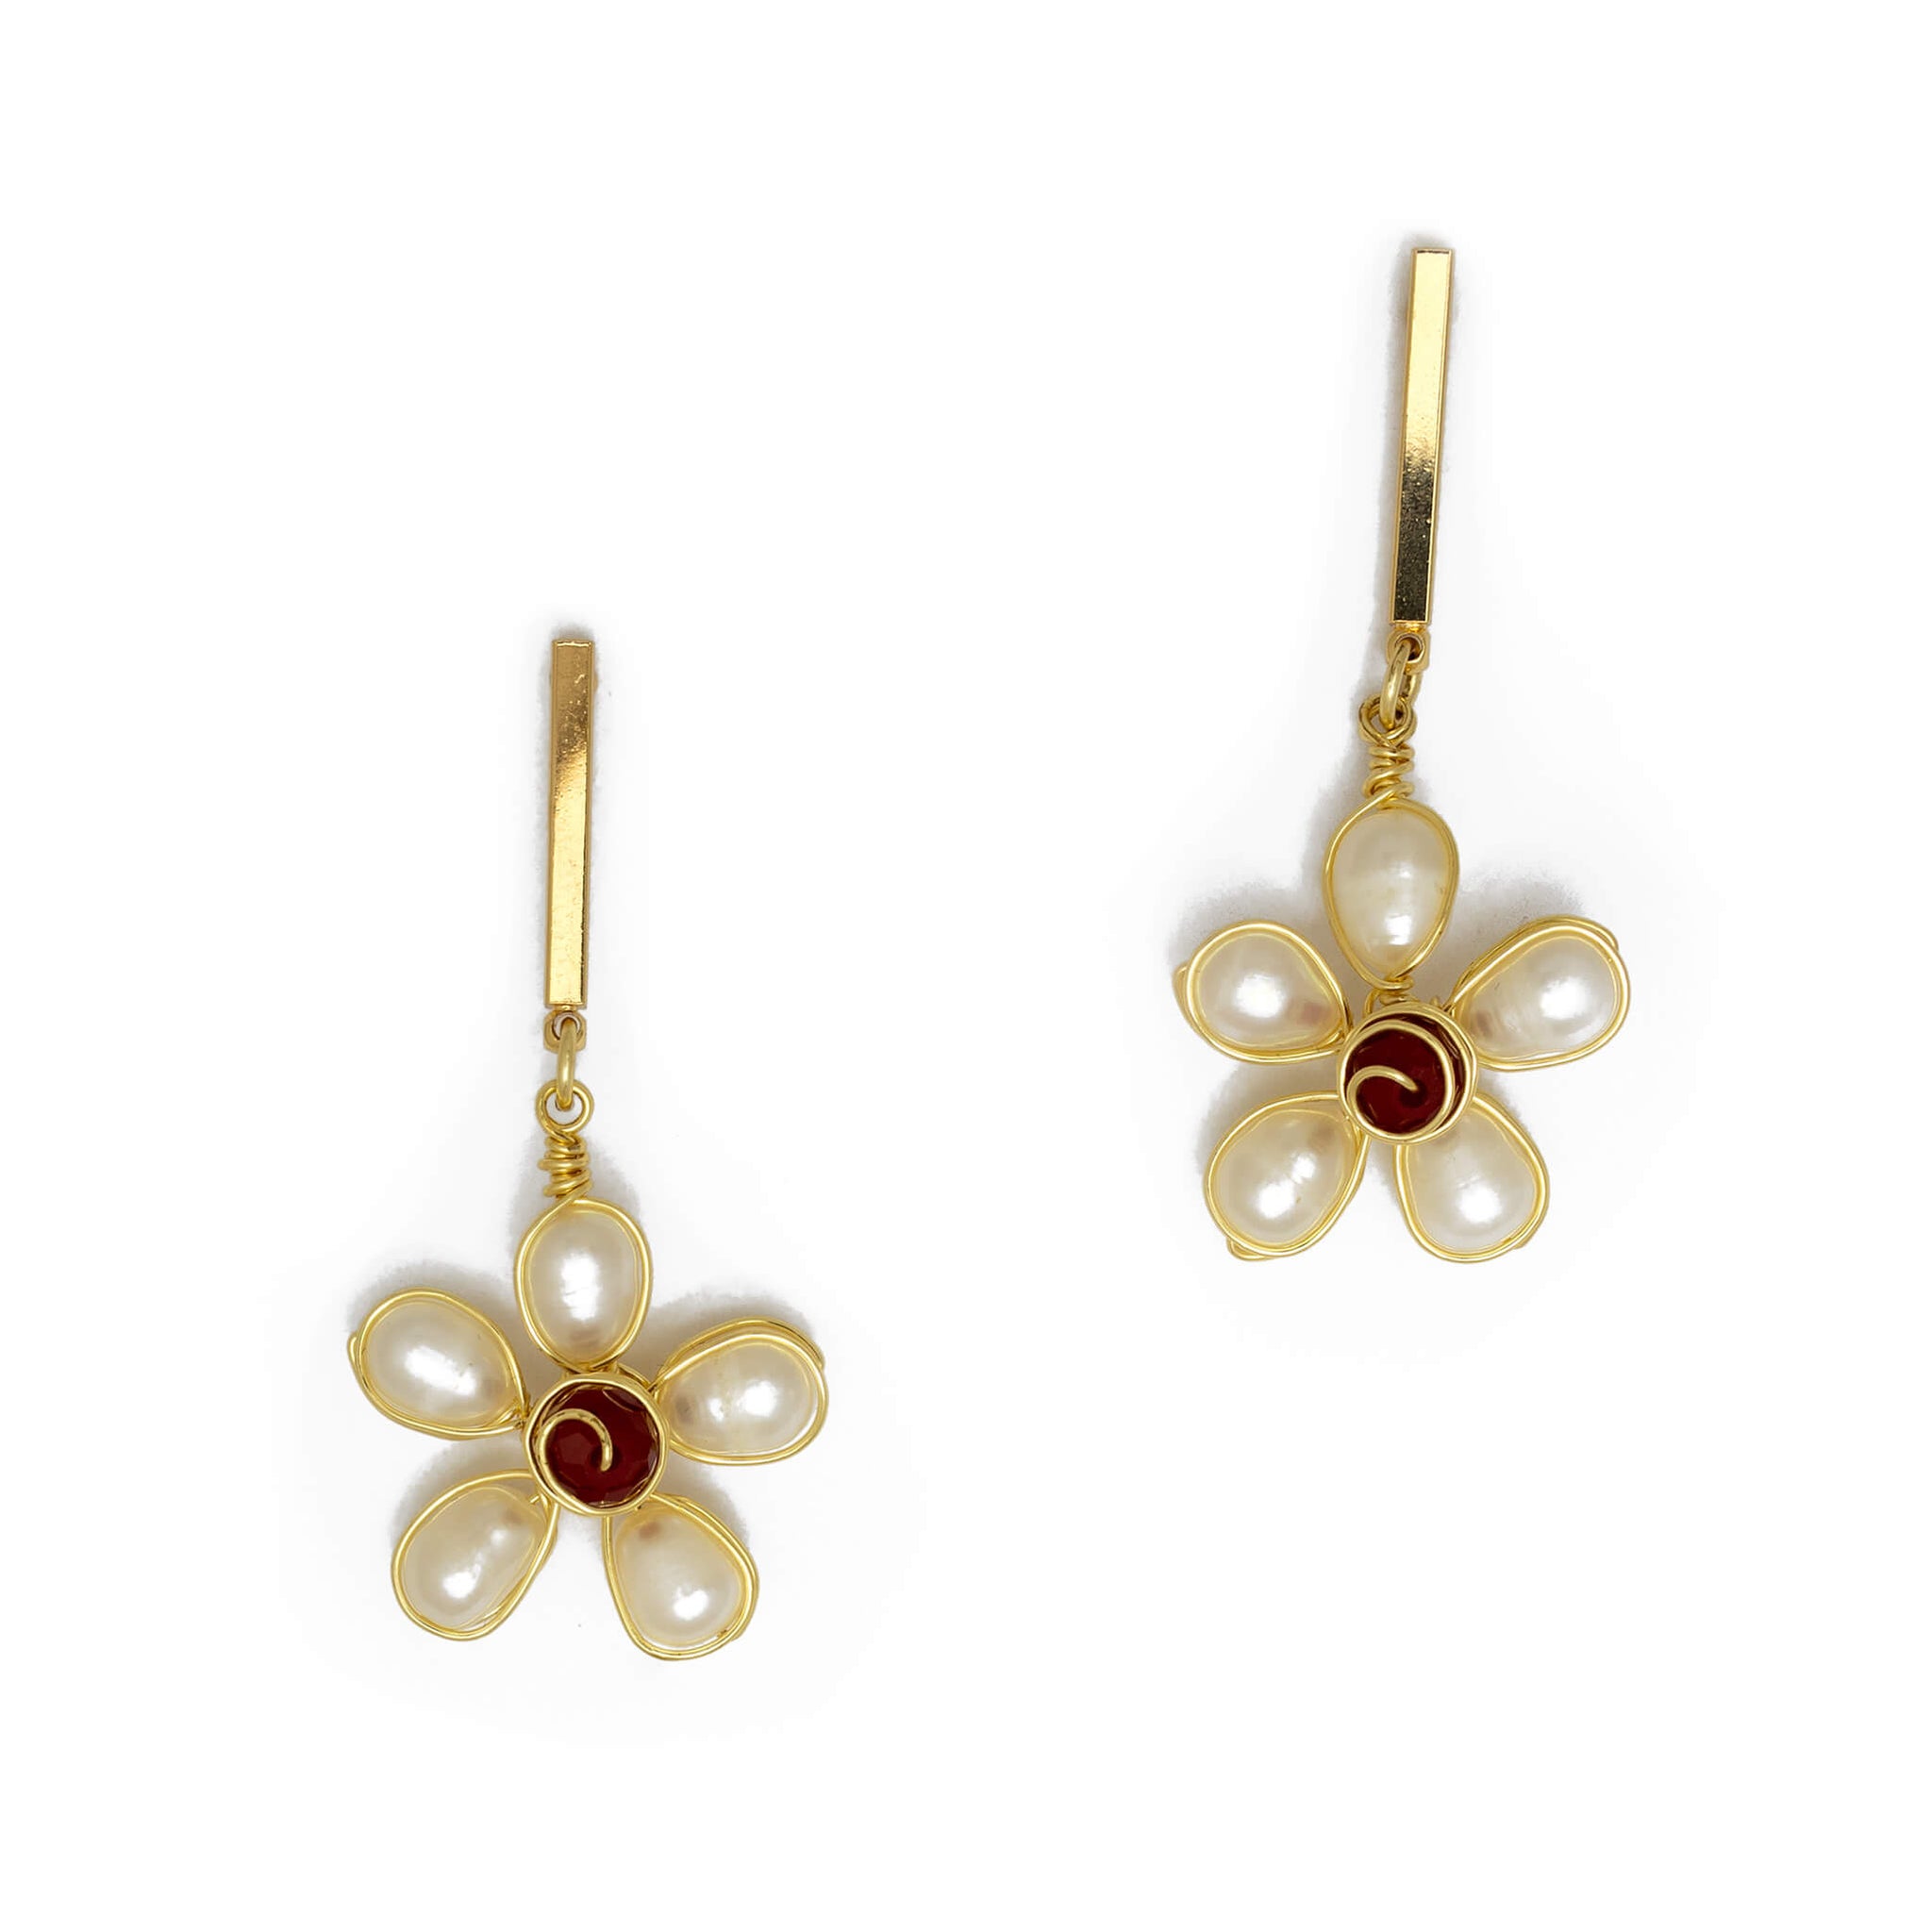 The Sade stud Earrings are 2 inches long, Gold, white, and red. Minimal dangle Earrings. Lightweight and comfortable earrings. Handmade for women. Freshwater pearl flower earrings.